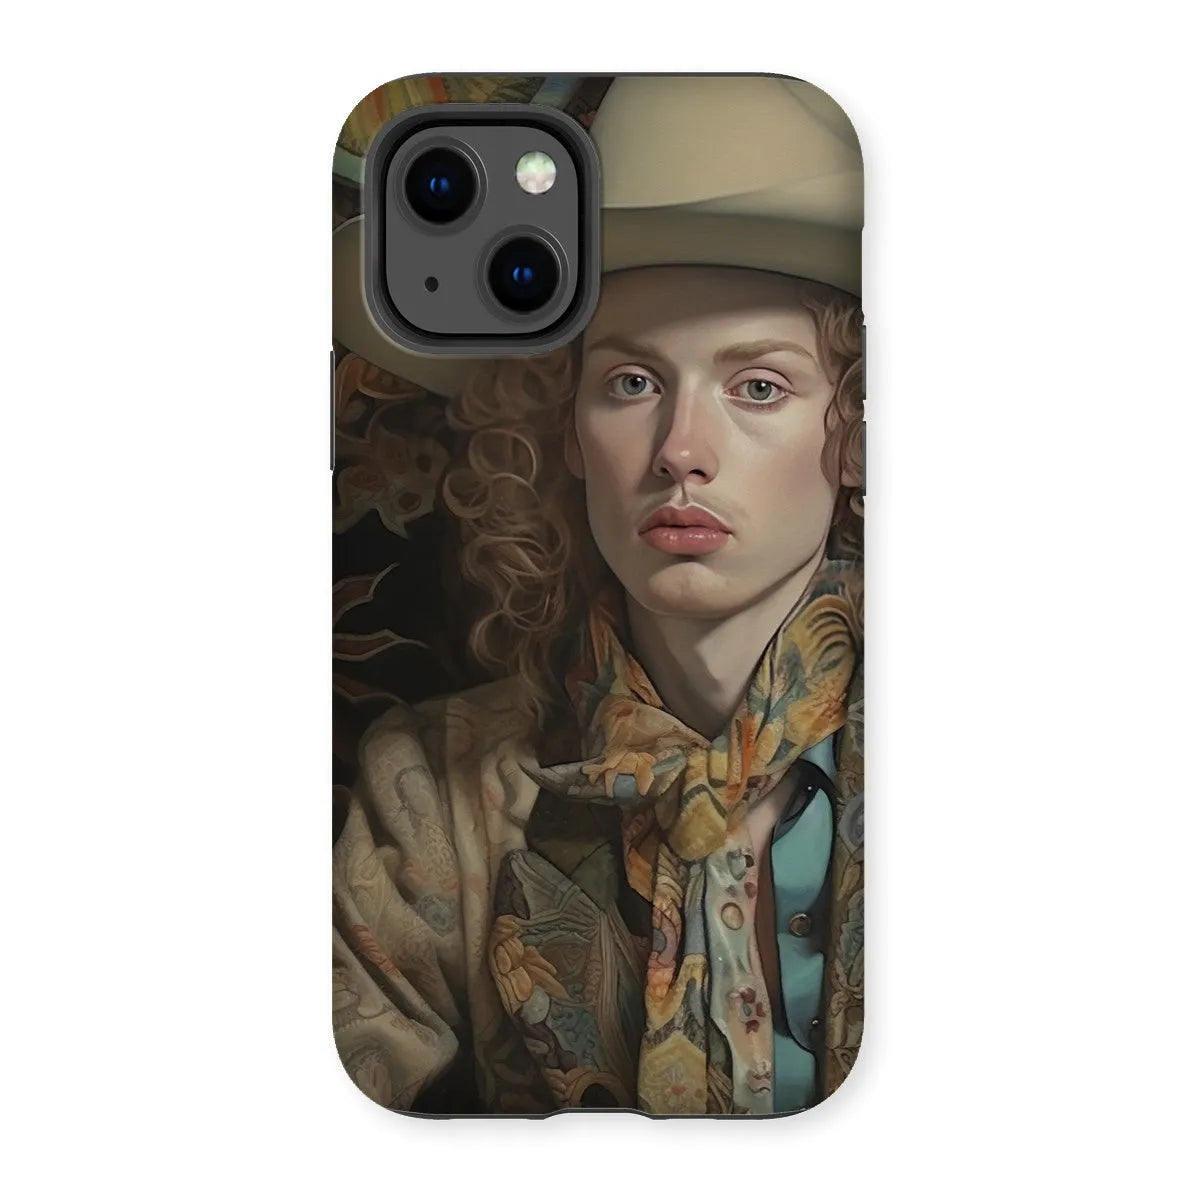 Ollie The Transgender Cowboy - F2m Dandy Outlaw Phone Case - Iphone 13 / Matte - Mobile Phone Cases - Aesthetic Art